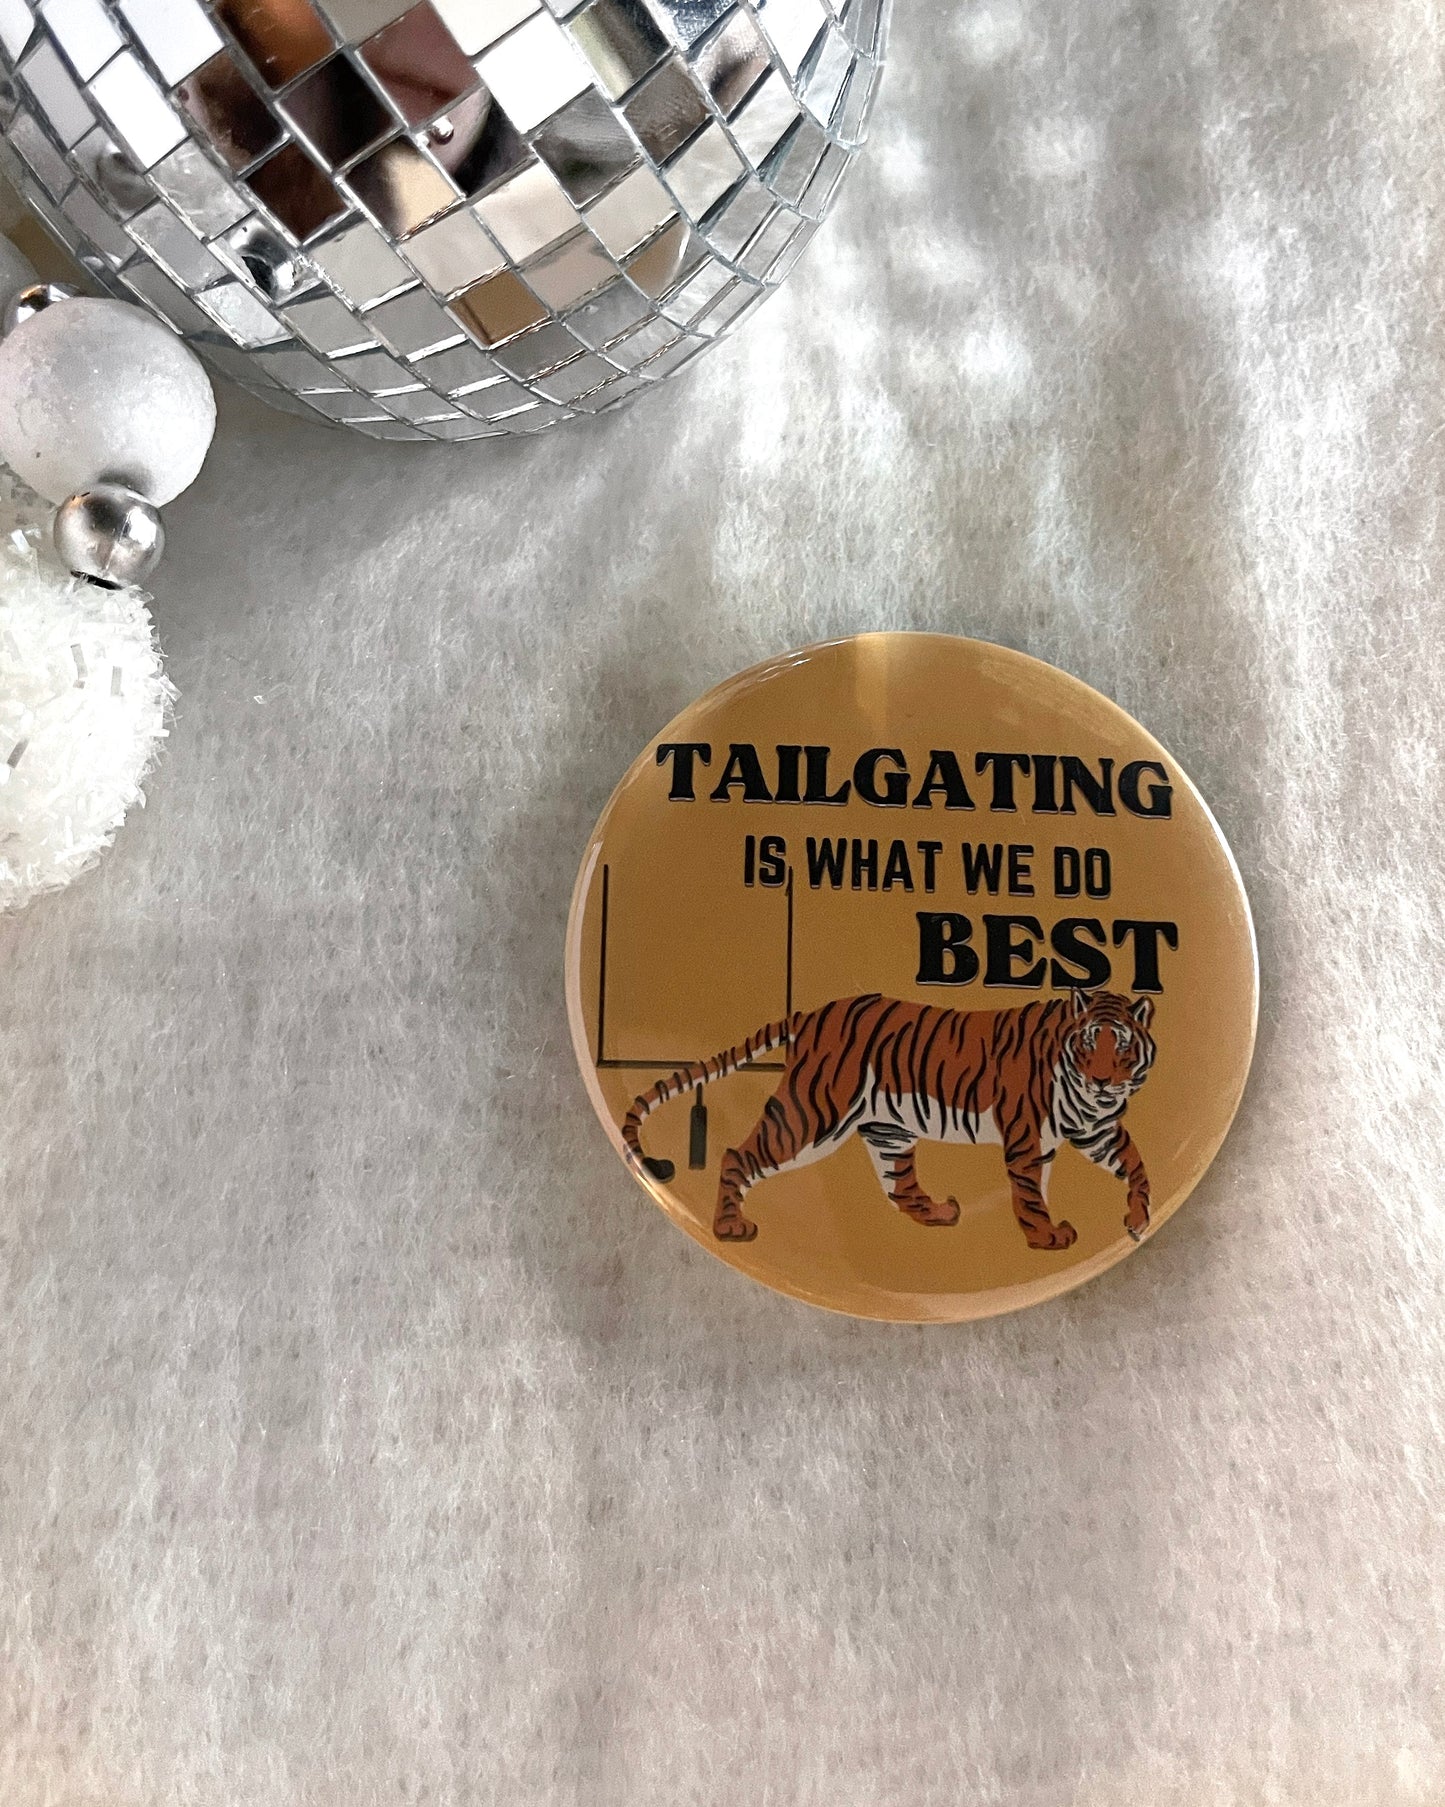 Tailgating is what we do Best Button